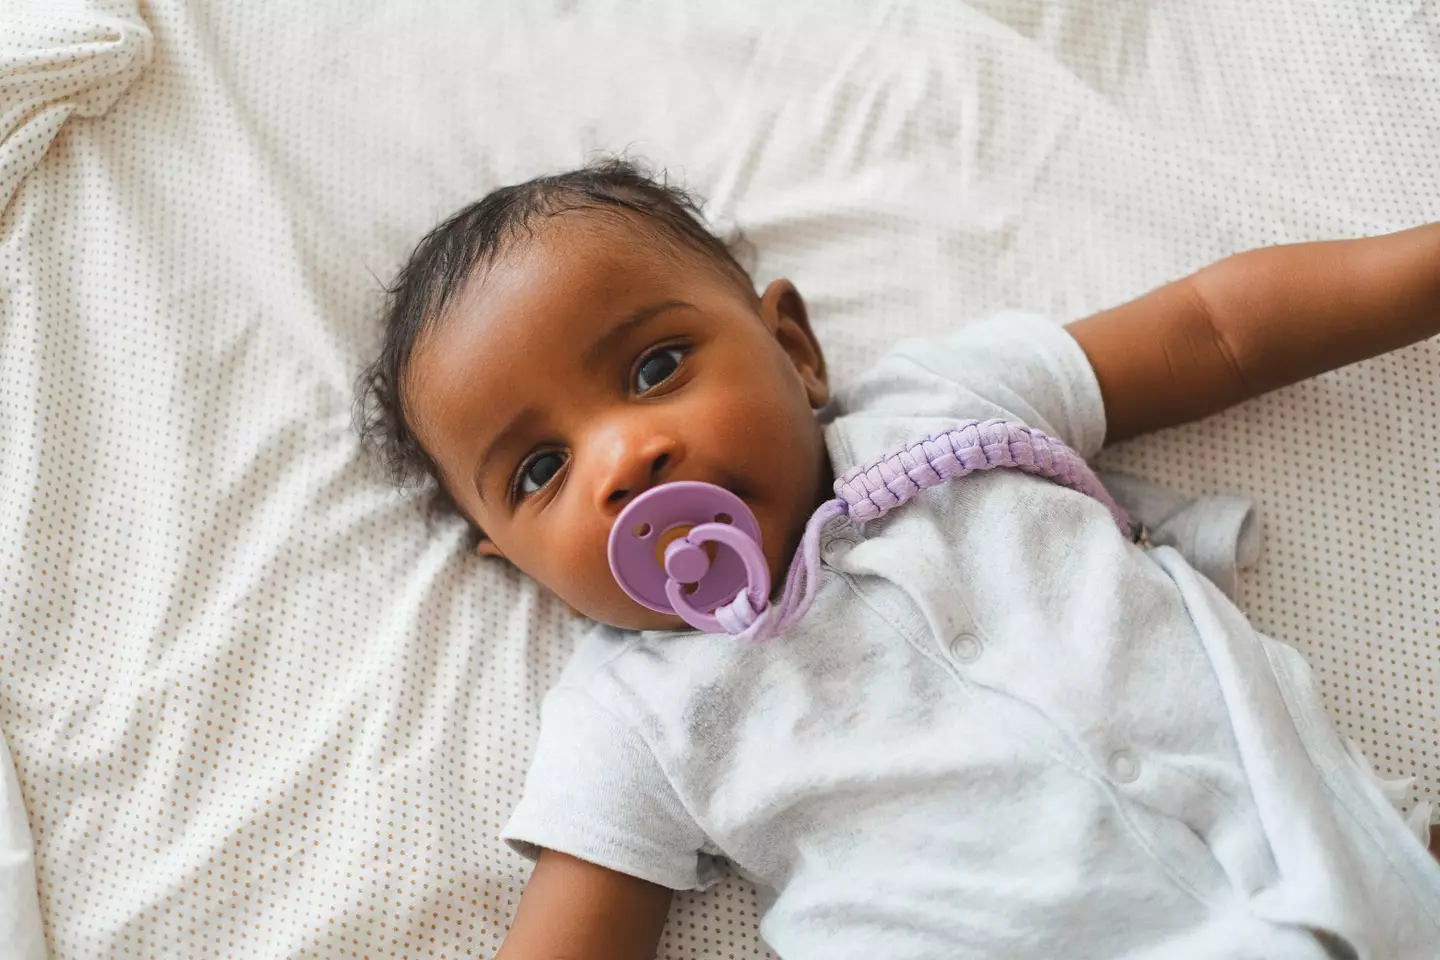 The report suggests that offering a dummy “at naptime and bedtime is recommended to reduce the risk of SIDS”.